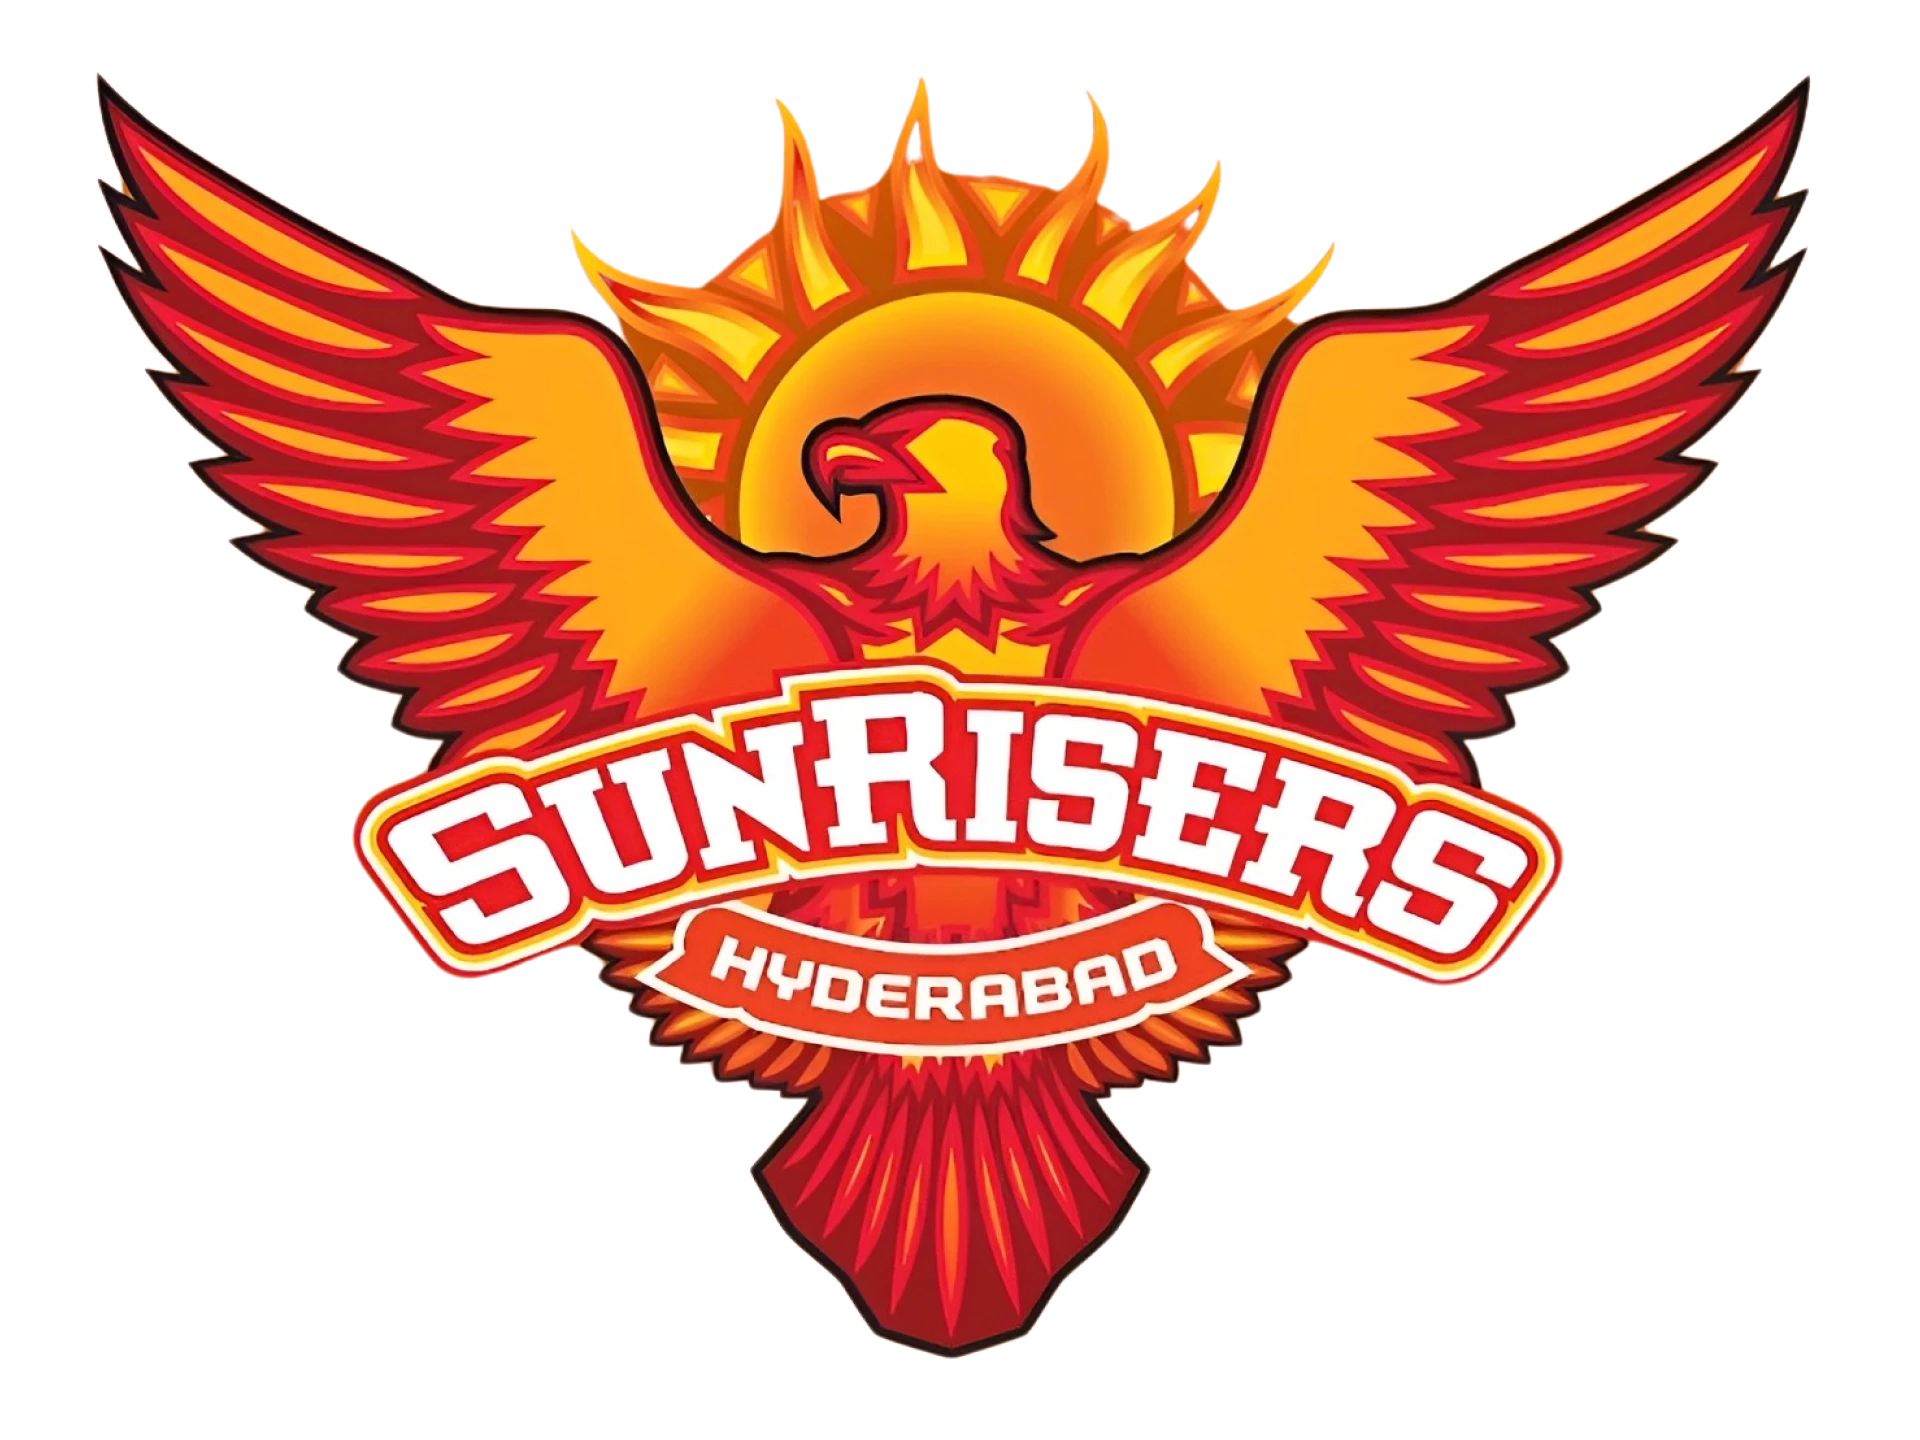 Sunrisers Hyderabad is the team that will play in the IPL match.